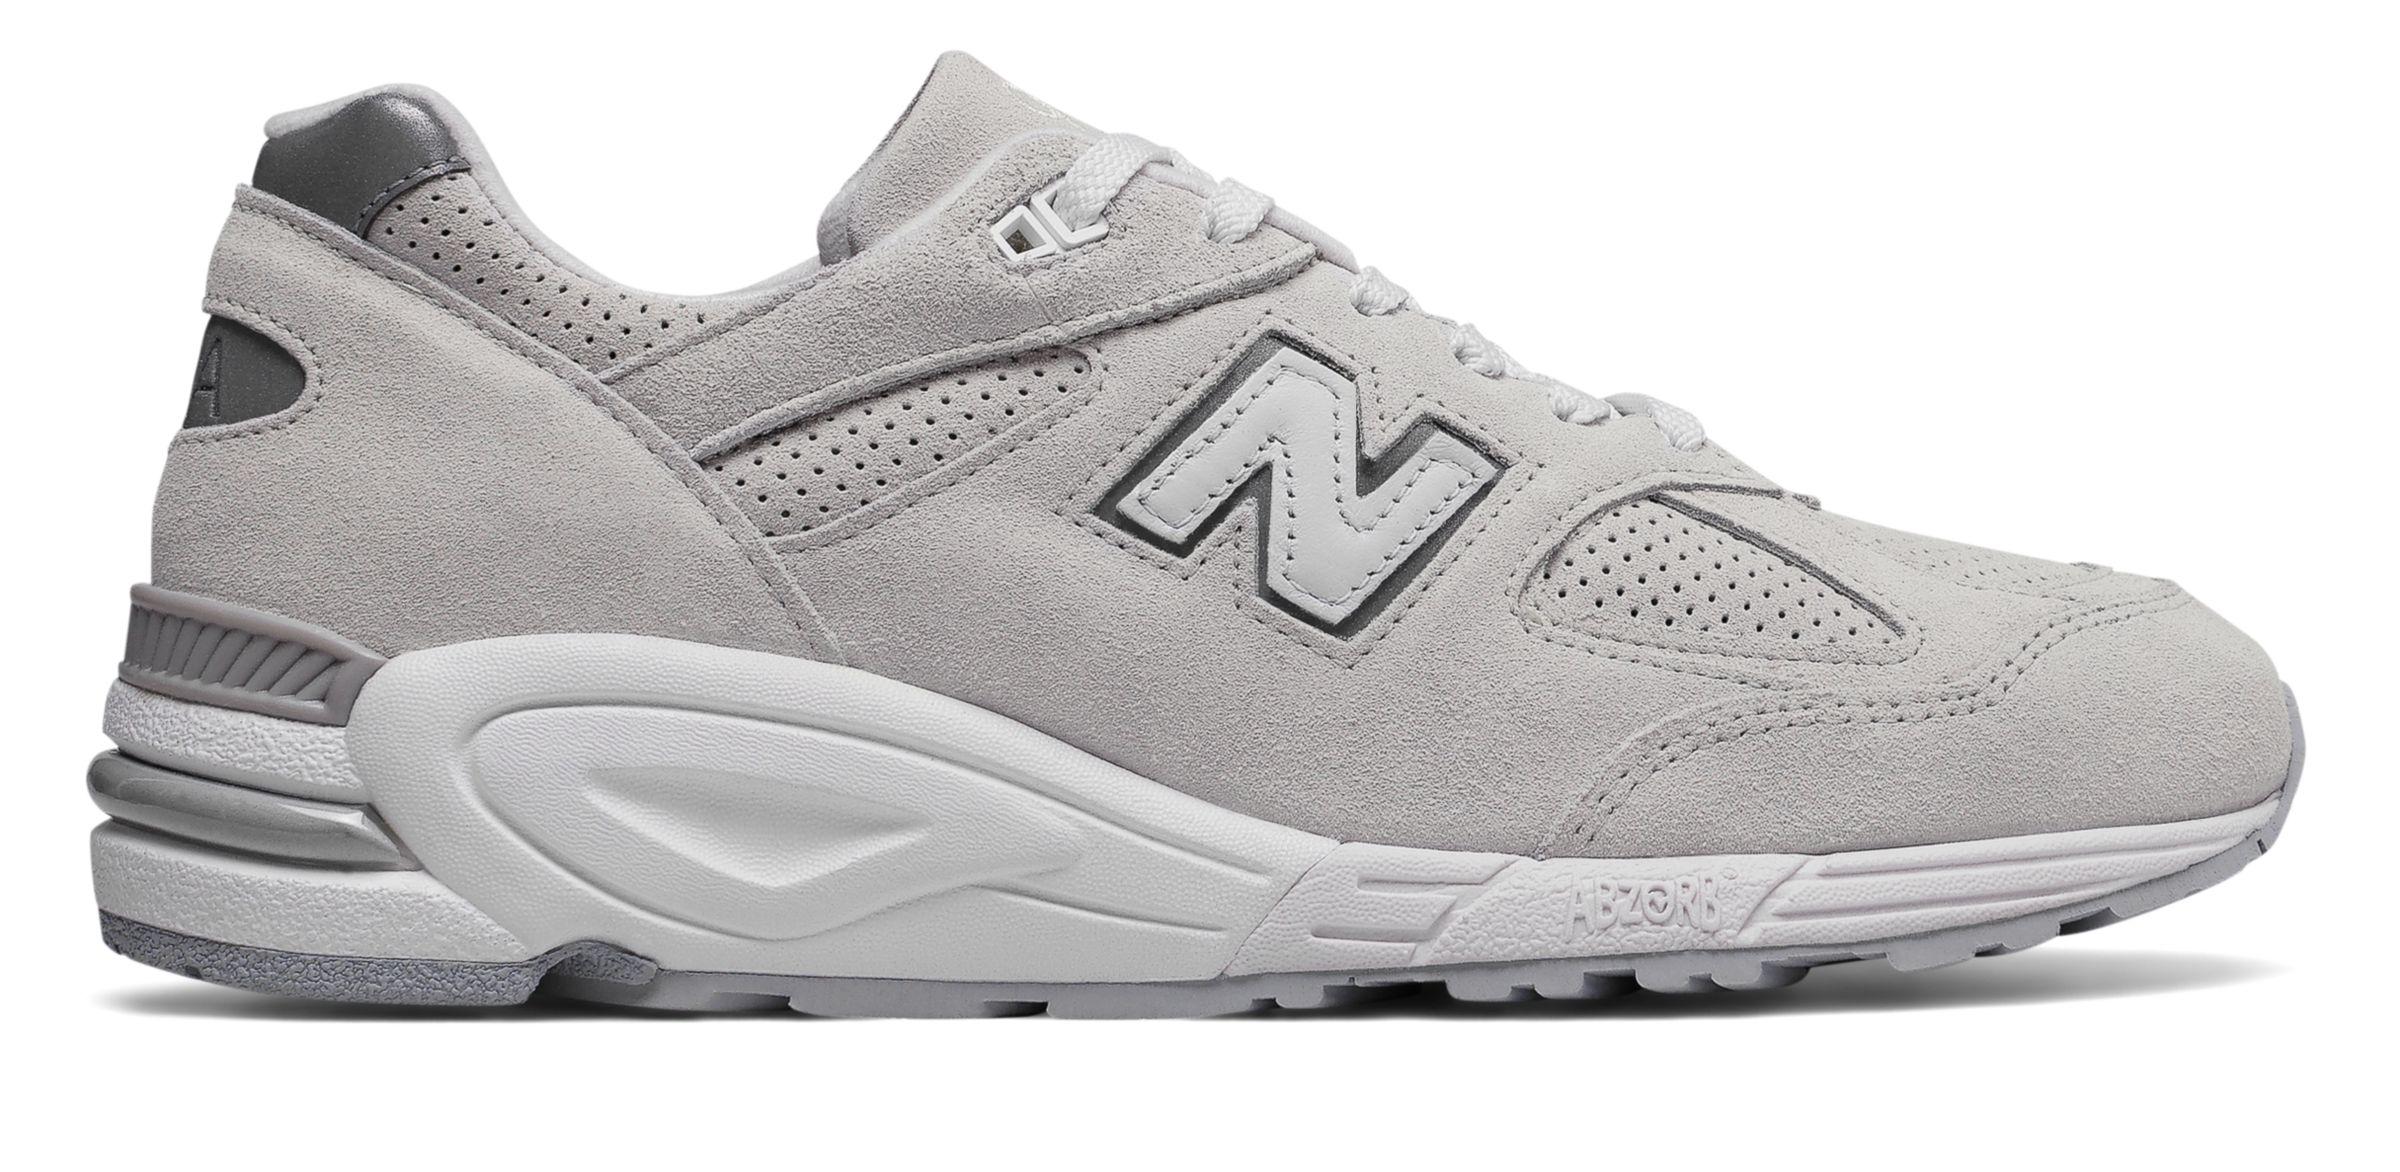 New Balance Suede 990v2 Winter Peaks in 